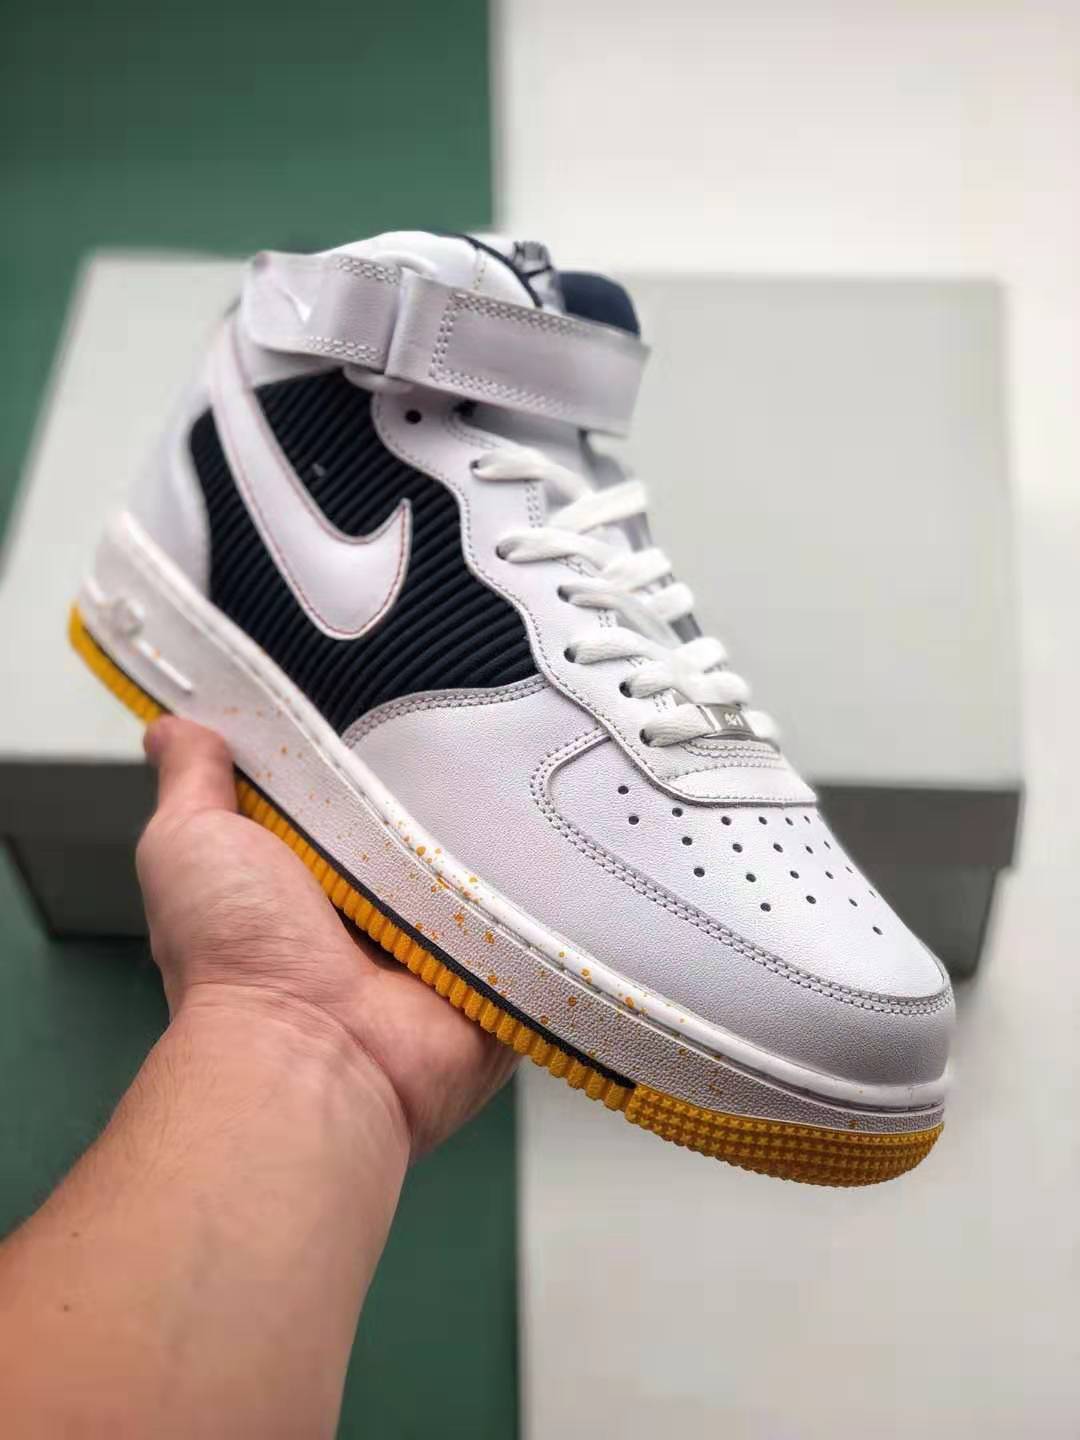 Nike Air Force 1 Mid White Black Yellow 596728-306 - Classic Style for Any Occasion